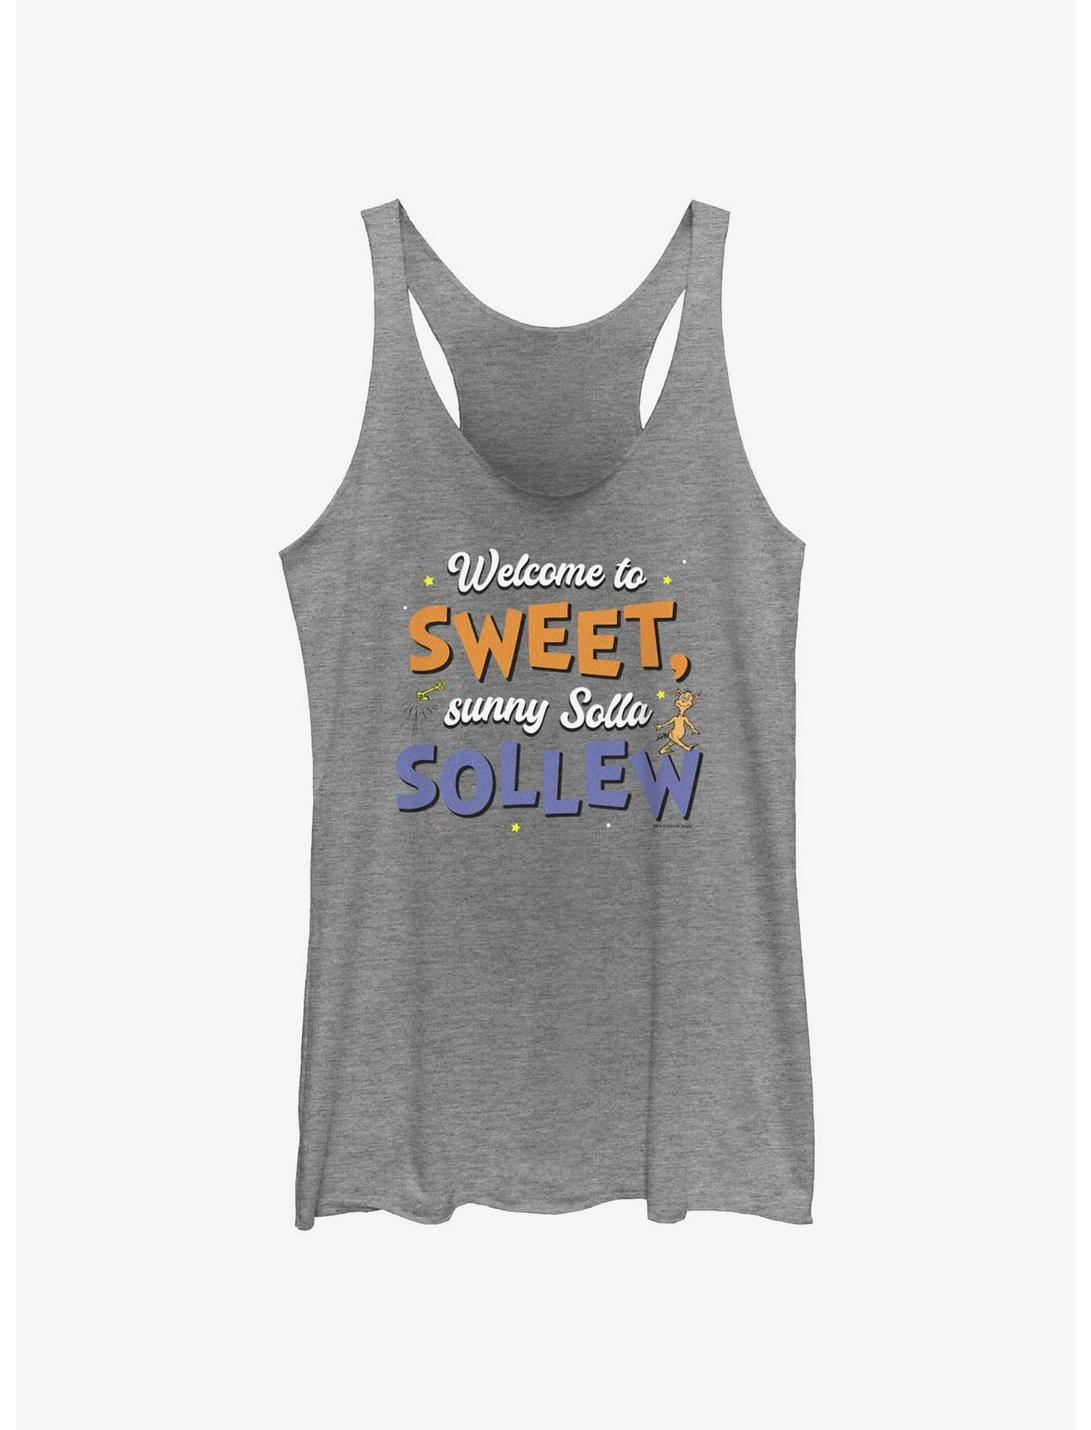 Dr. Seuss's I Had Trouble Getting Into Solla Sollew Welcome To Sweet Sunny Solla Sollew Womens Tank Top, GRAY HTR, hi-res